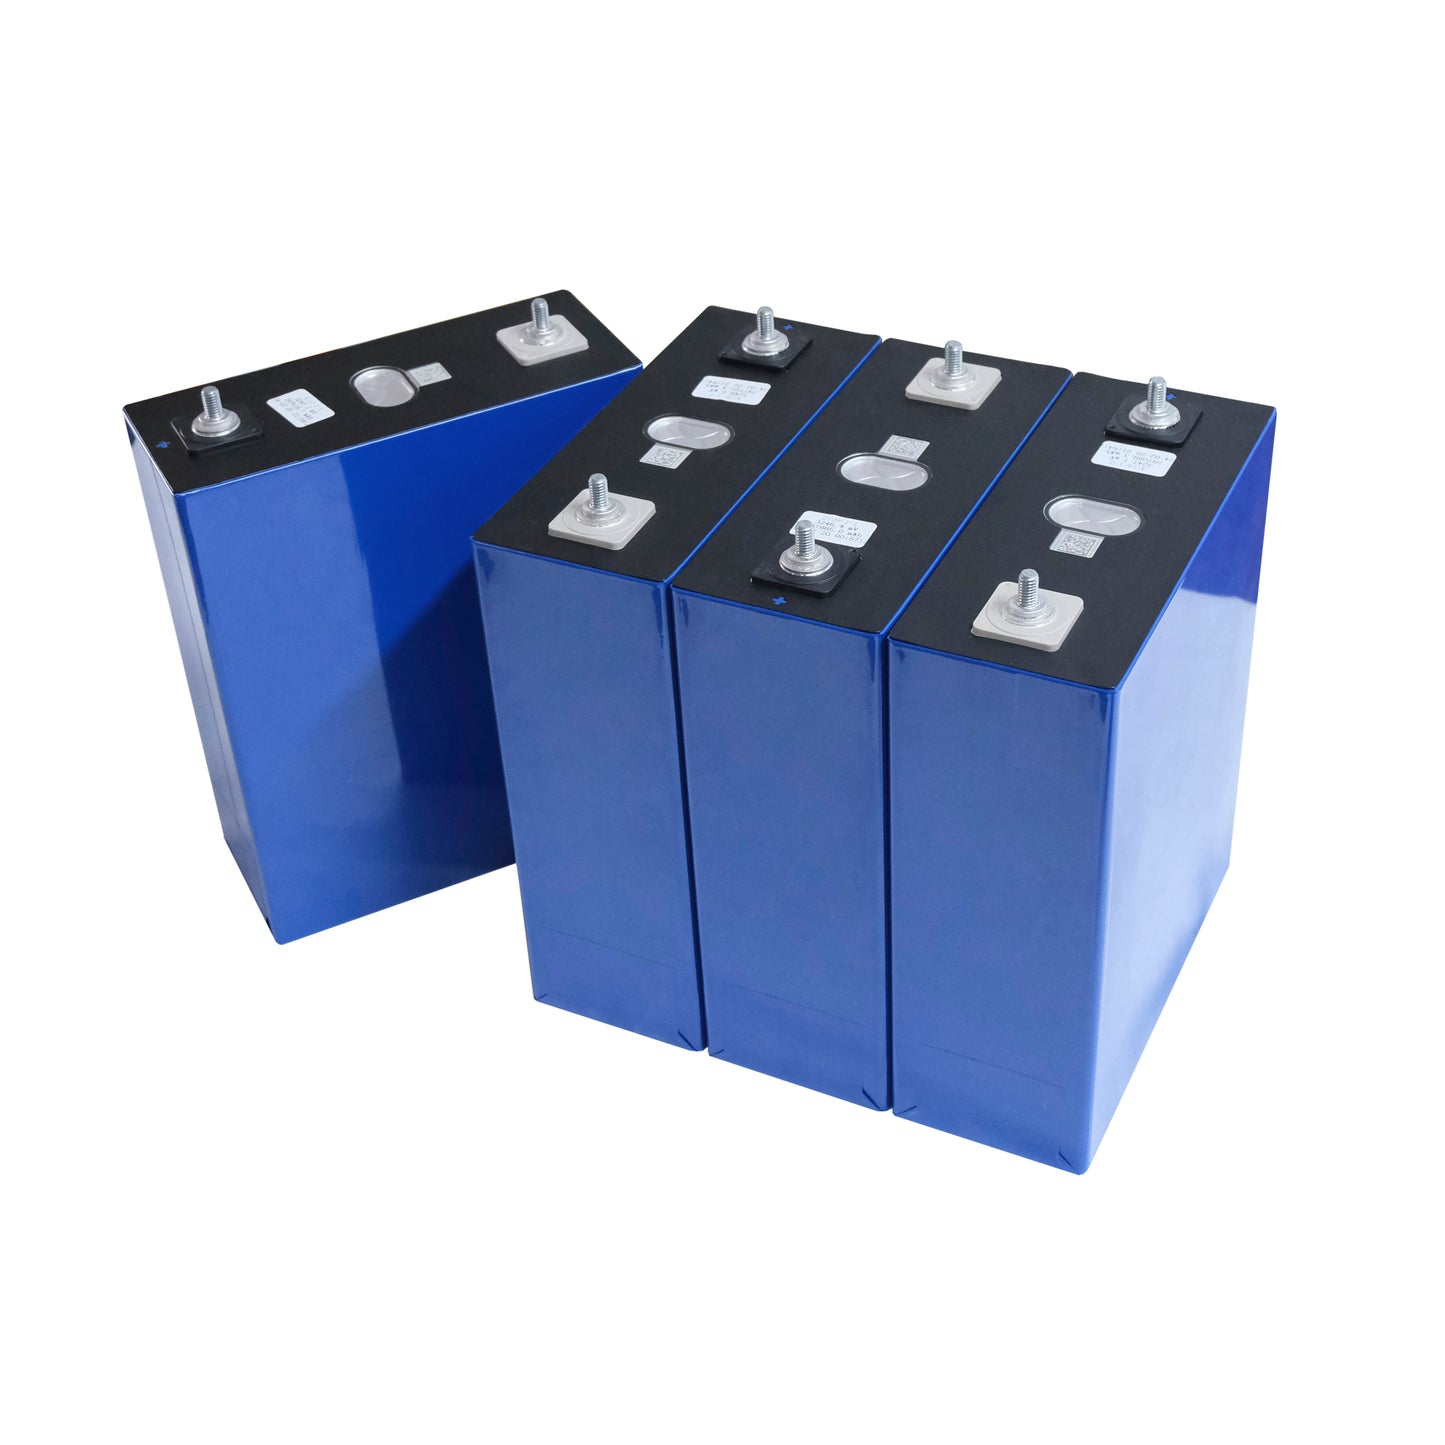 4PCS 3.2V Hthium 280Ah Grade A Lifepo4 Battery Cells Rechargeable for EV Solar China Shipping